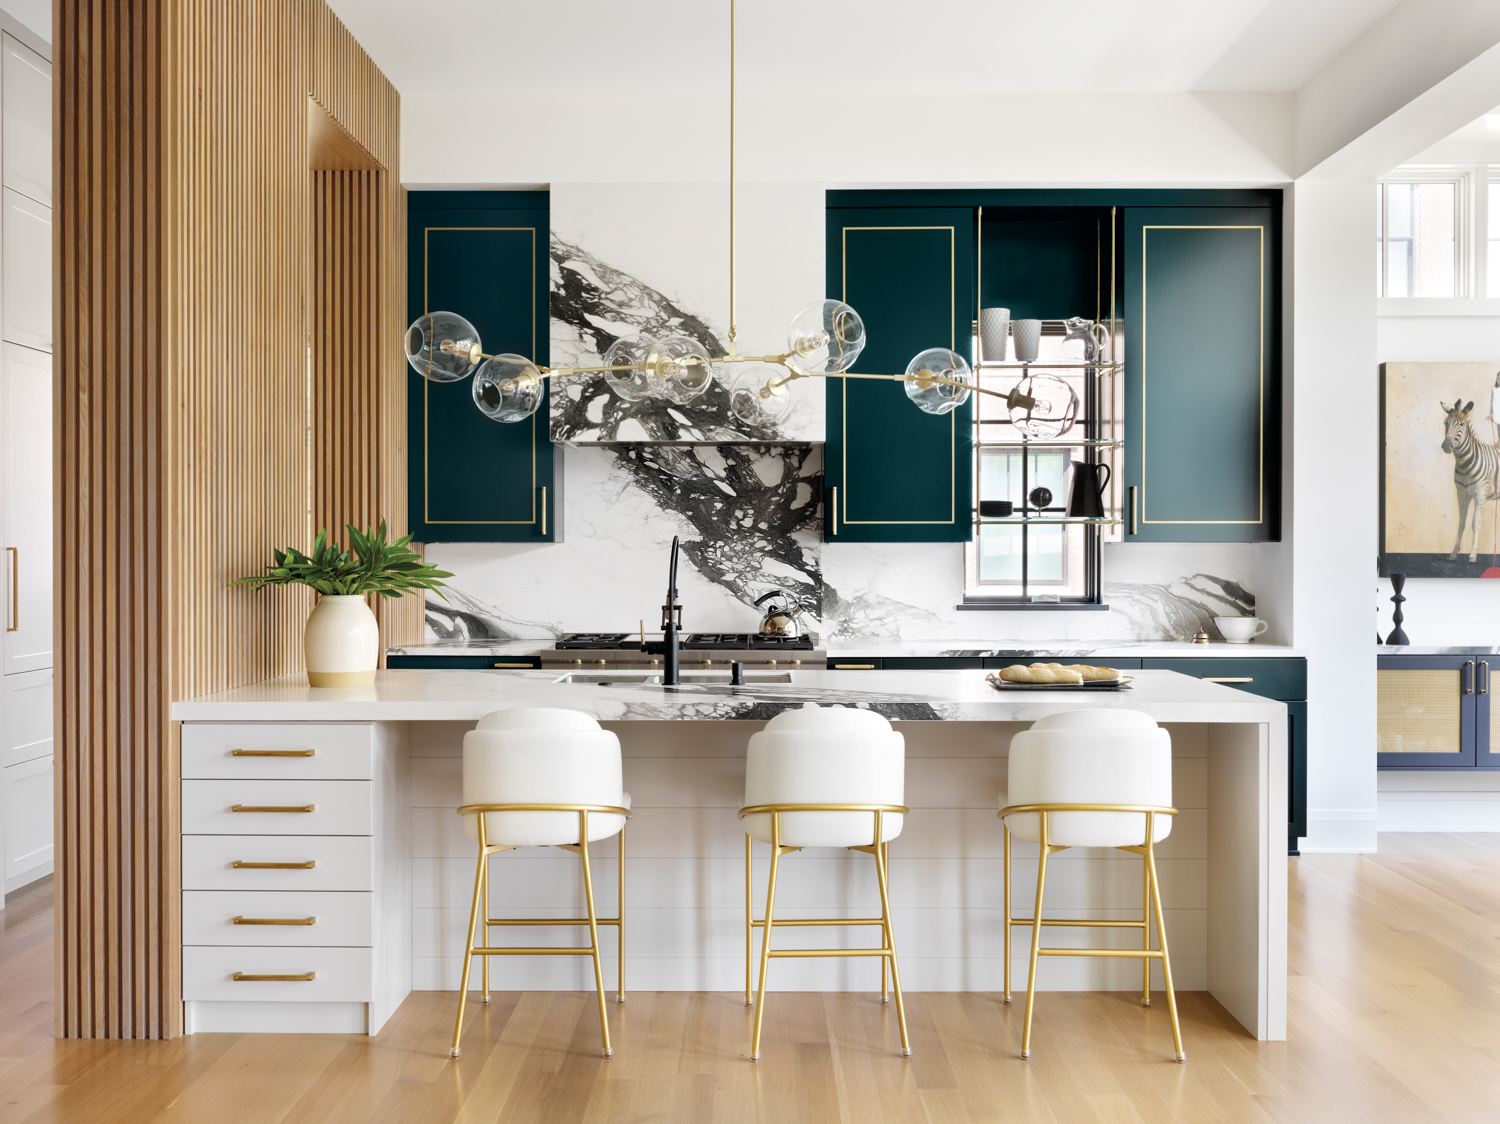 White kitchen island topped with black-and-white porcelain countertop paired with forest-green cabinetry